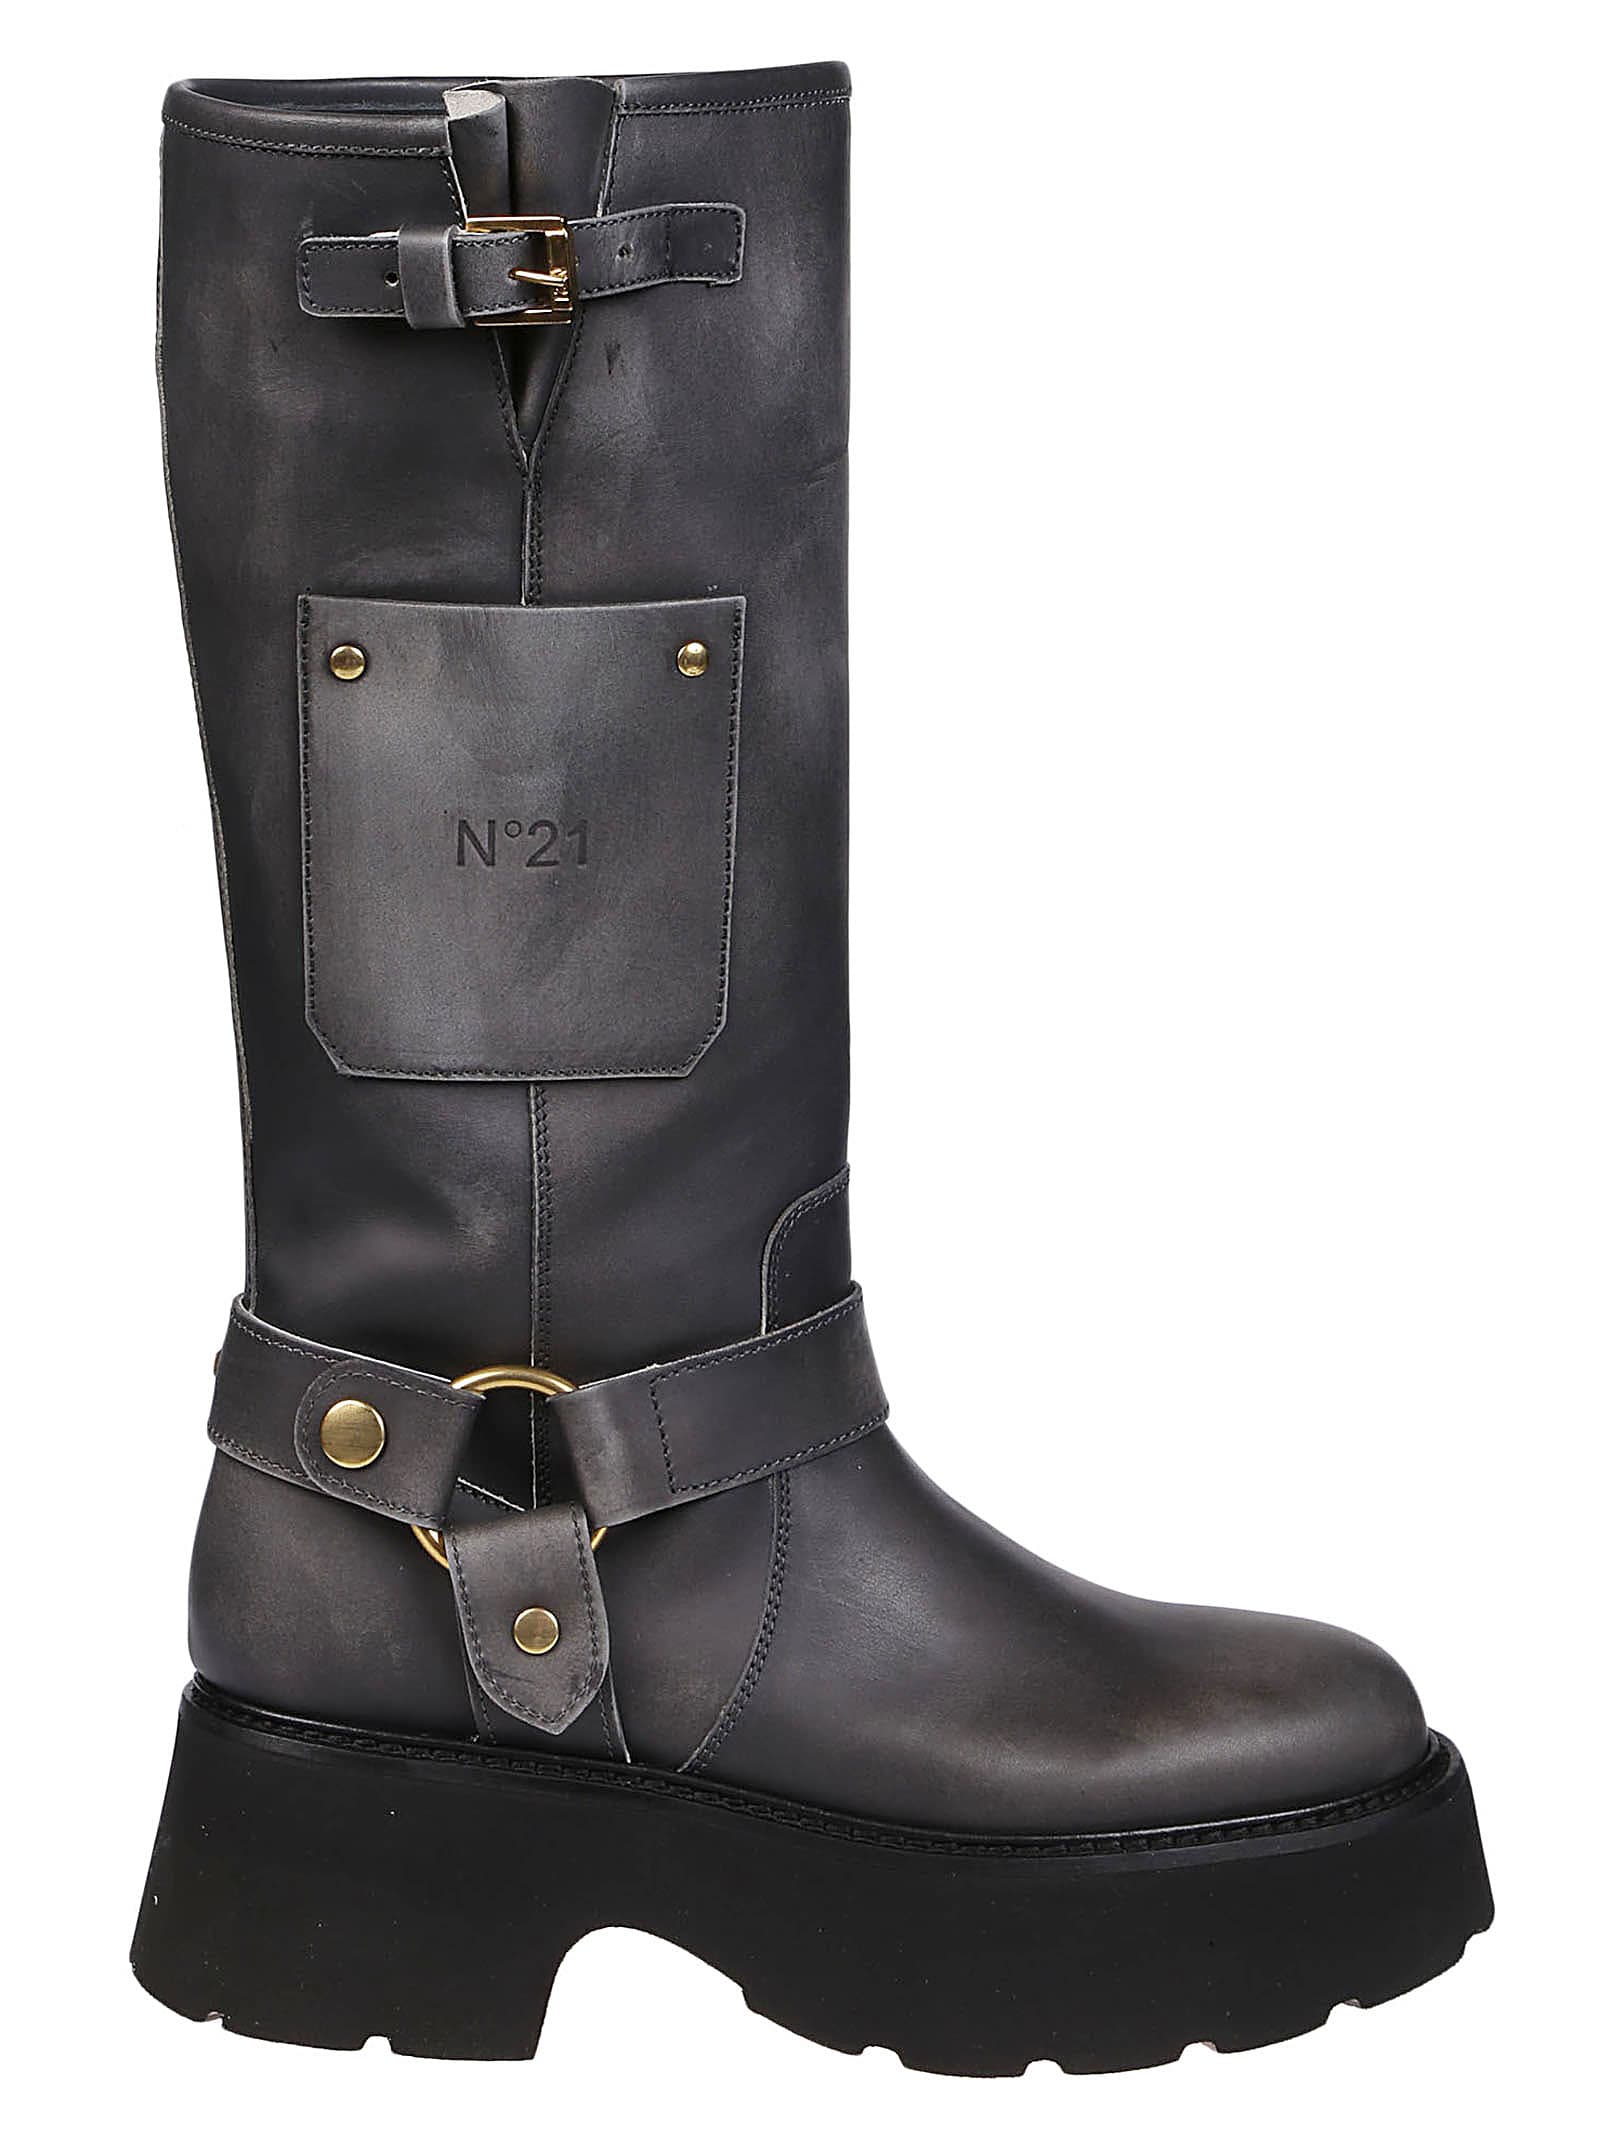 N.21 Boots